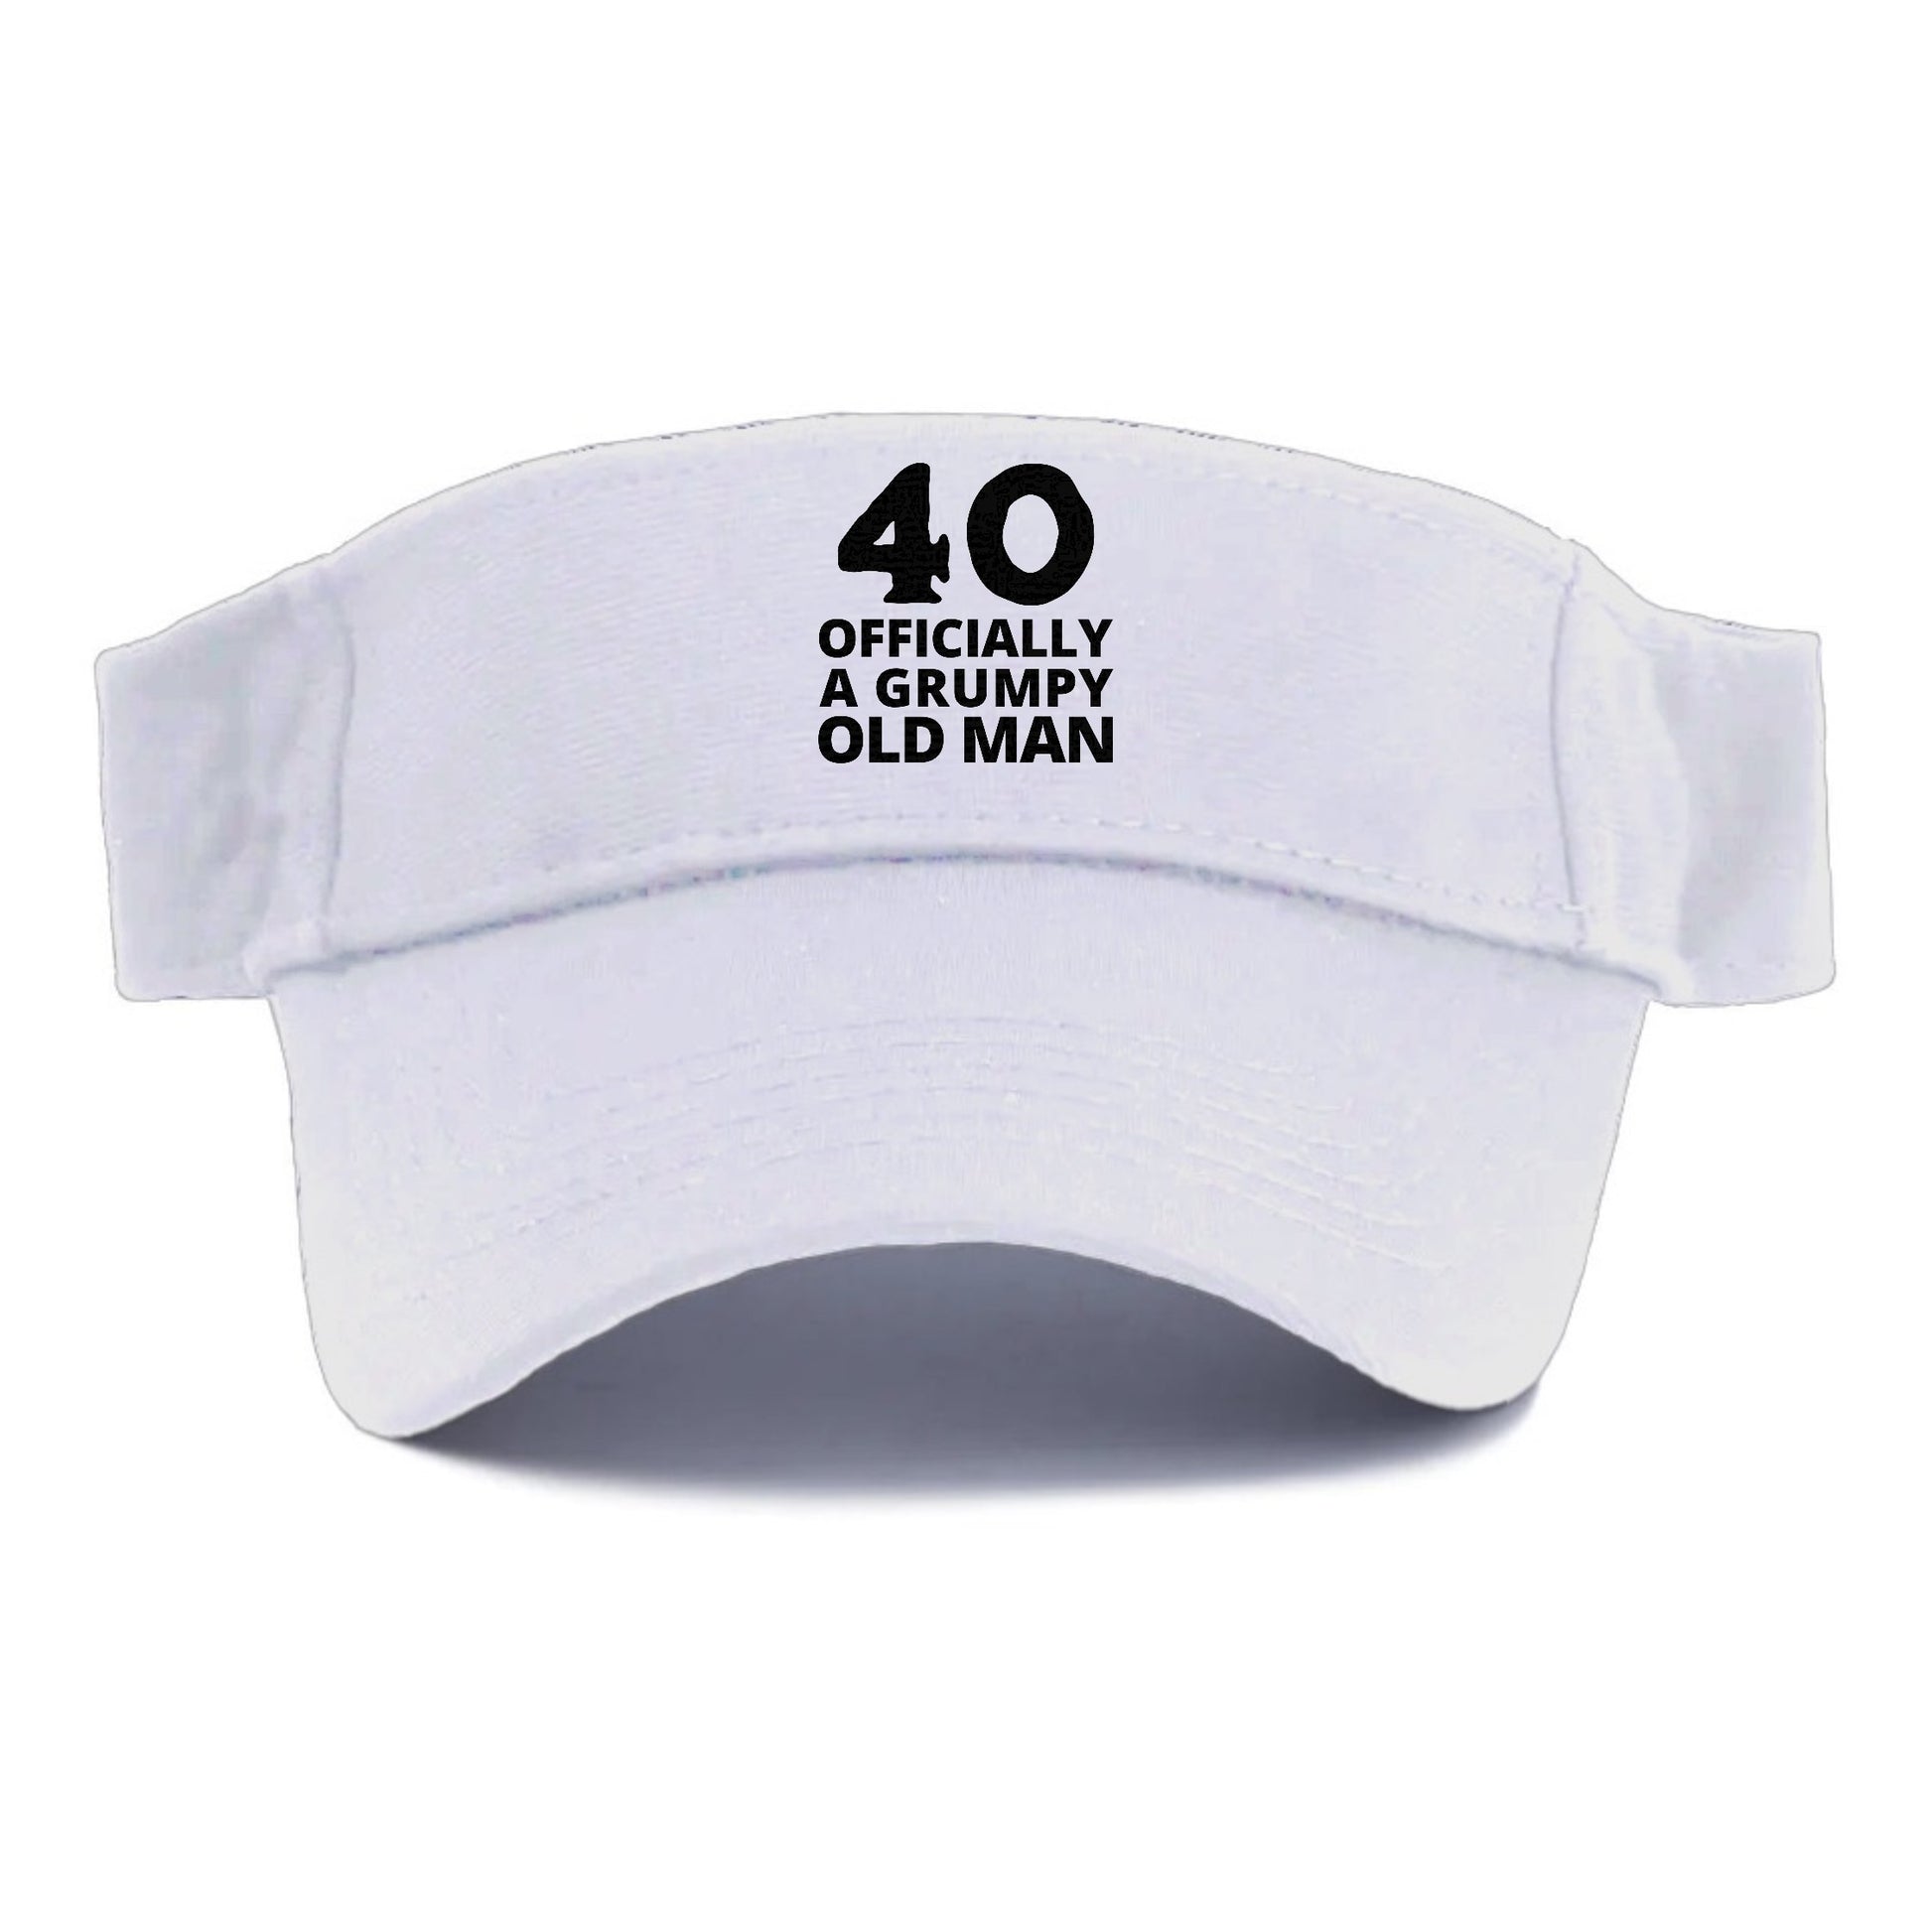 40 OFFICIALLY A GRUMPY OLD MAN Hat